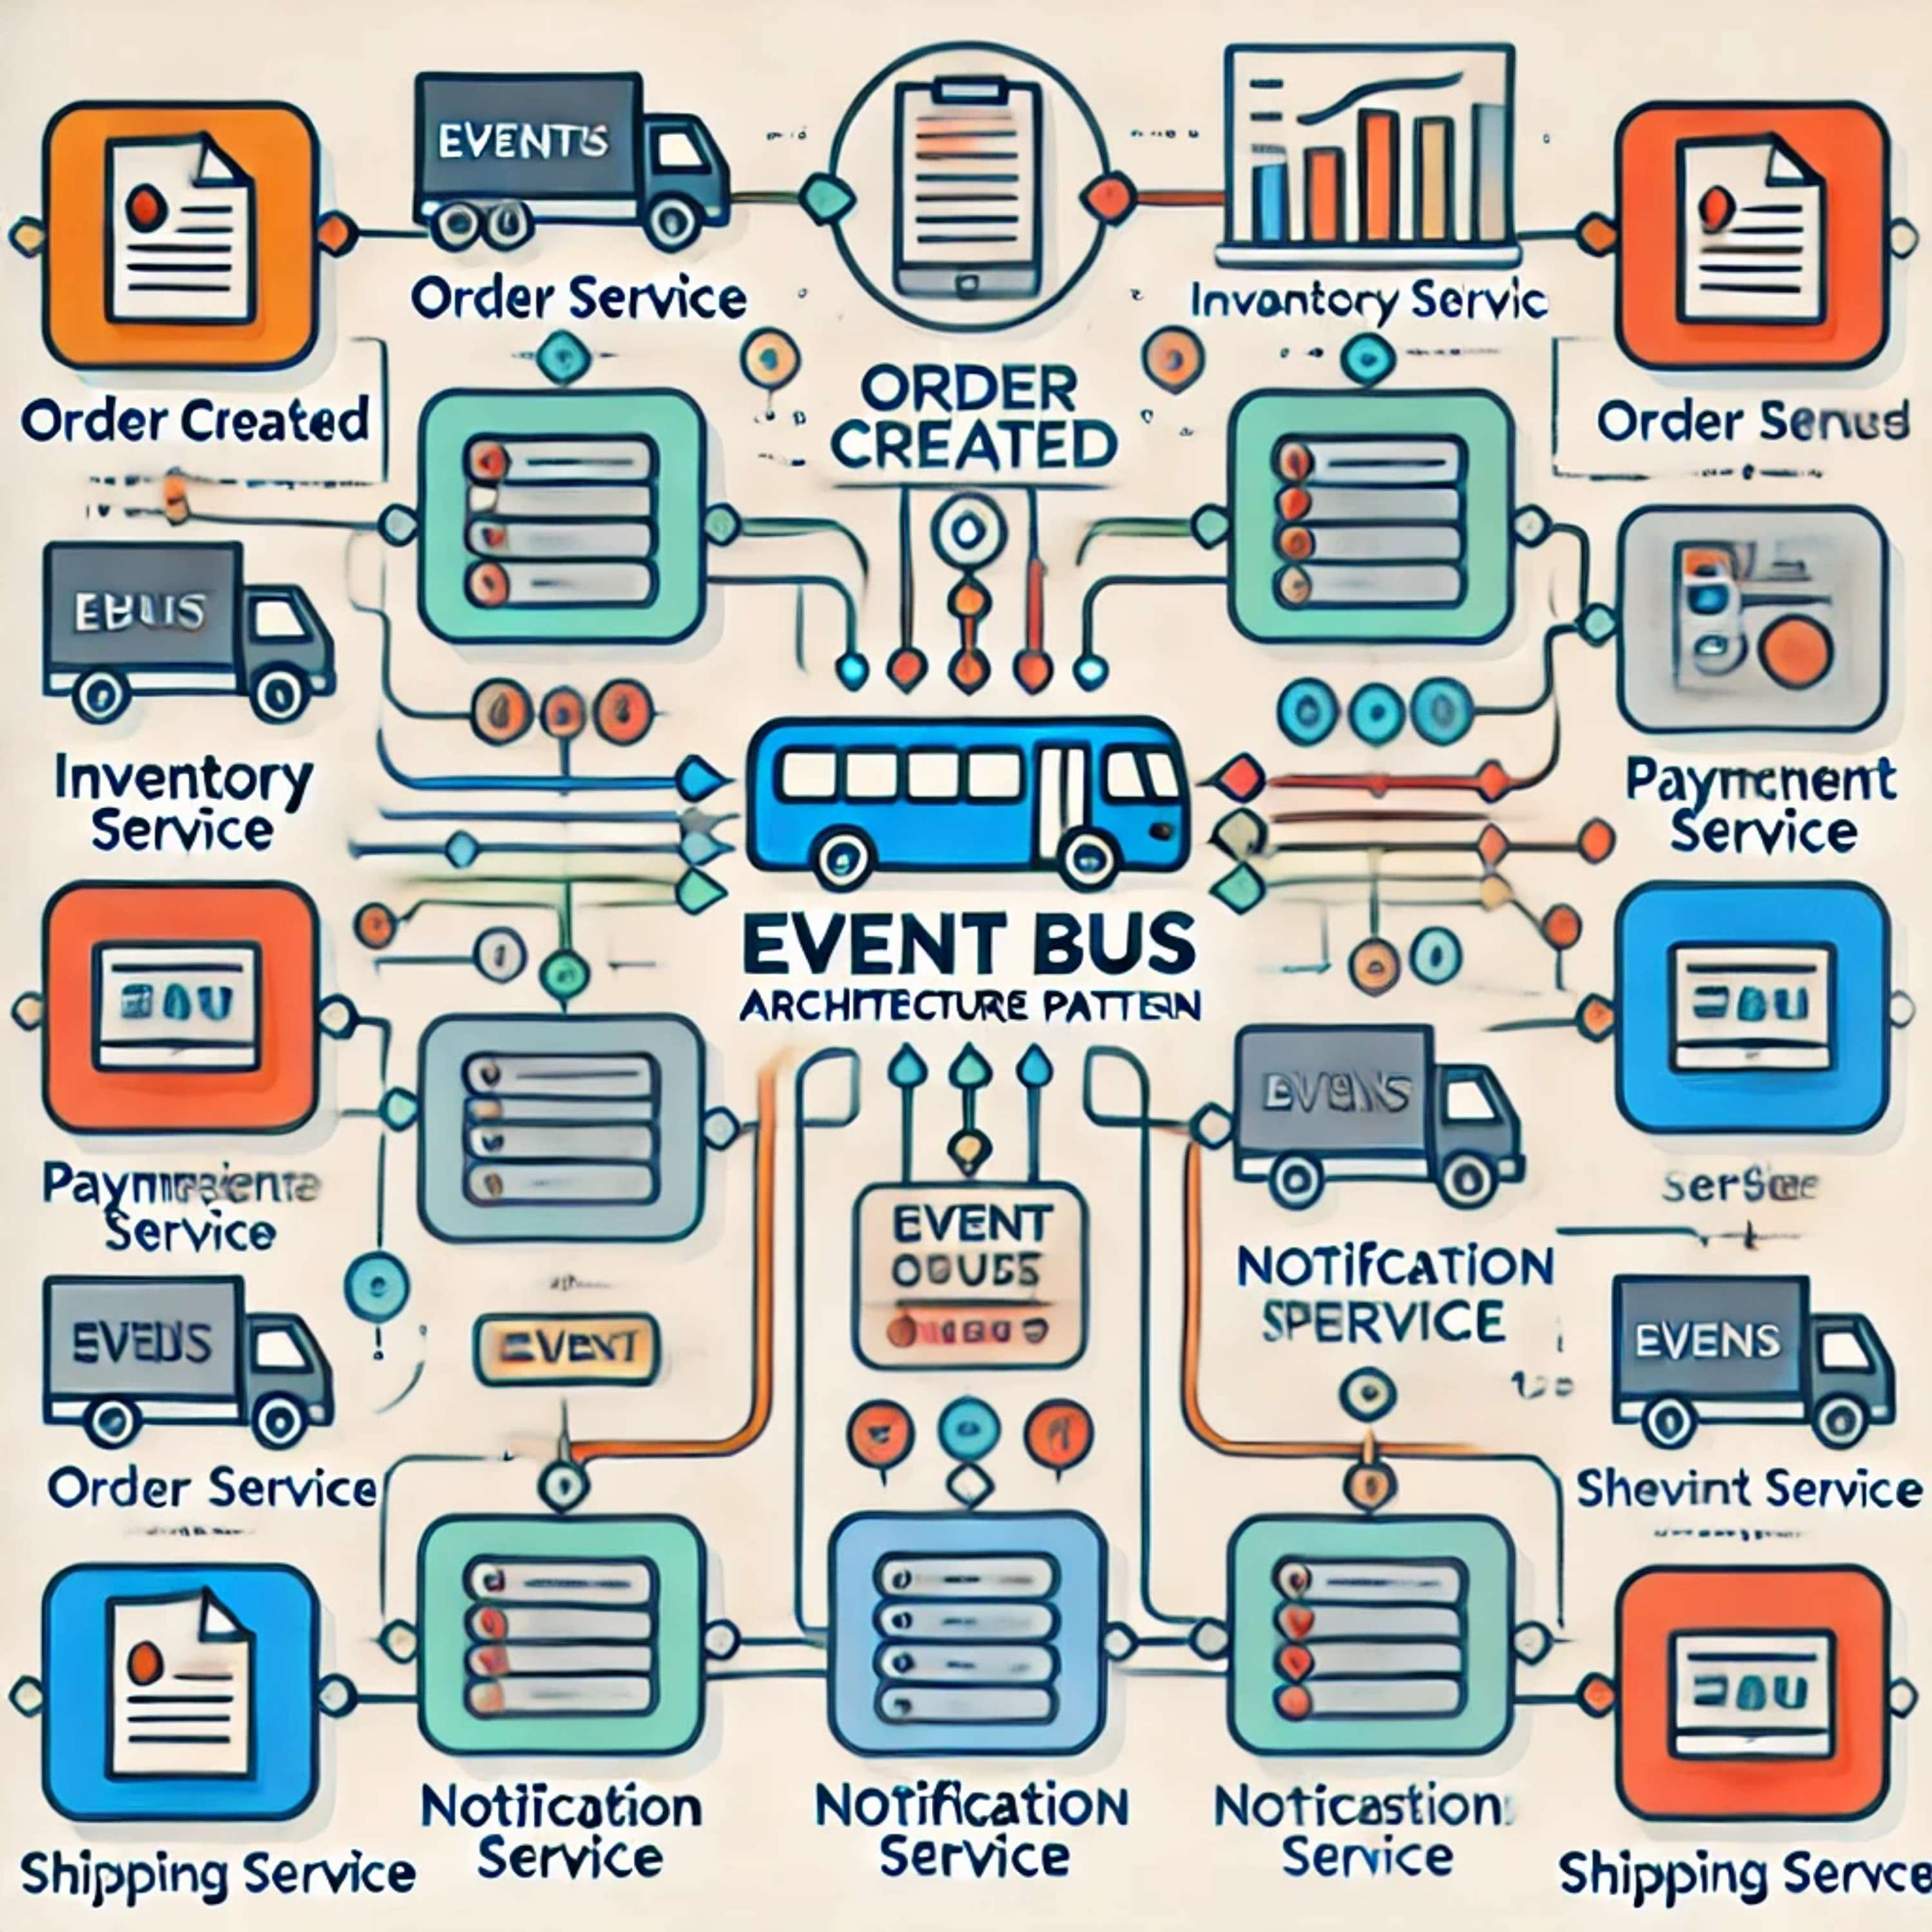 Event Bus in Microservice Architecture With RabbitMQ and Python